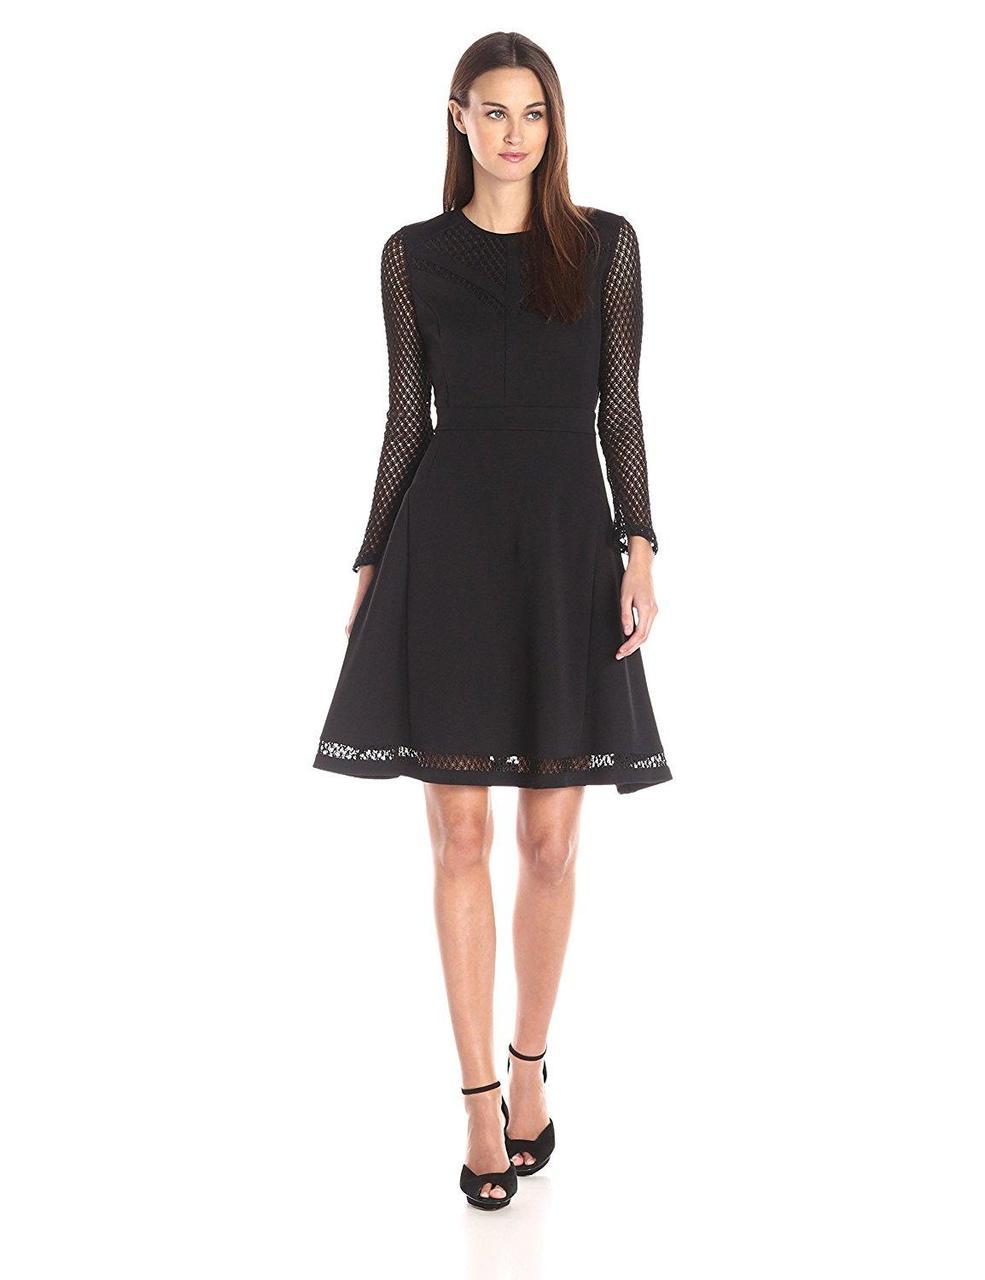 Adrianna Papell - Lace Jewel Neck A-line Dress 15247150 in Black